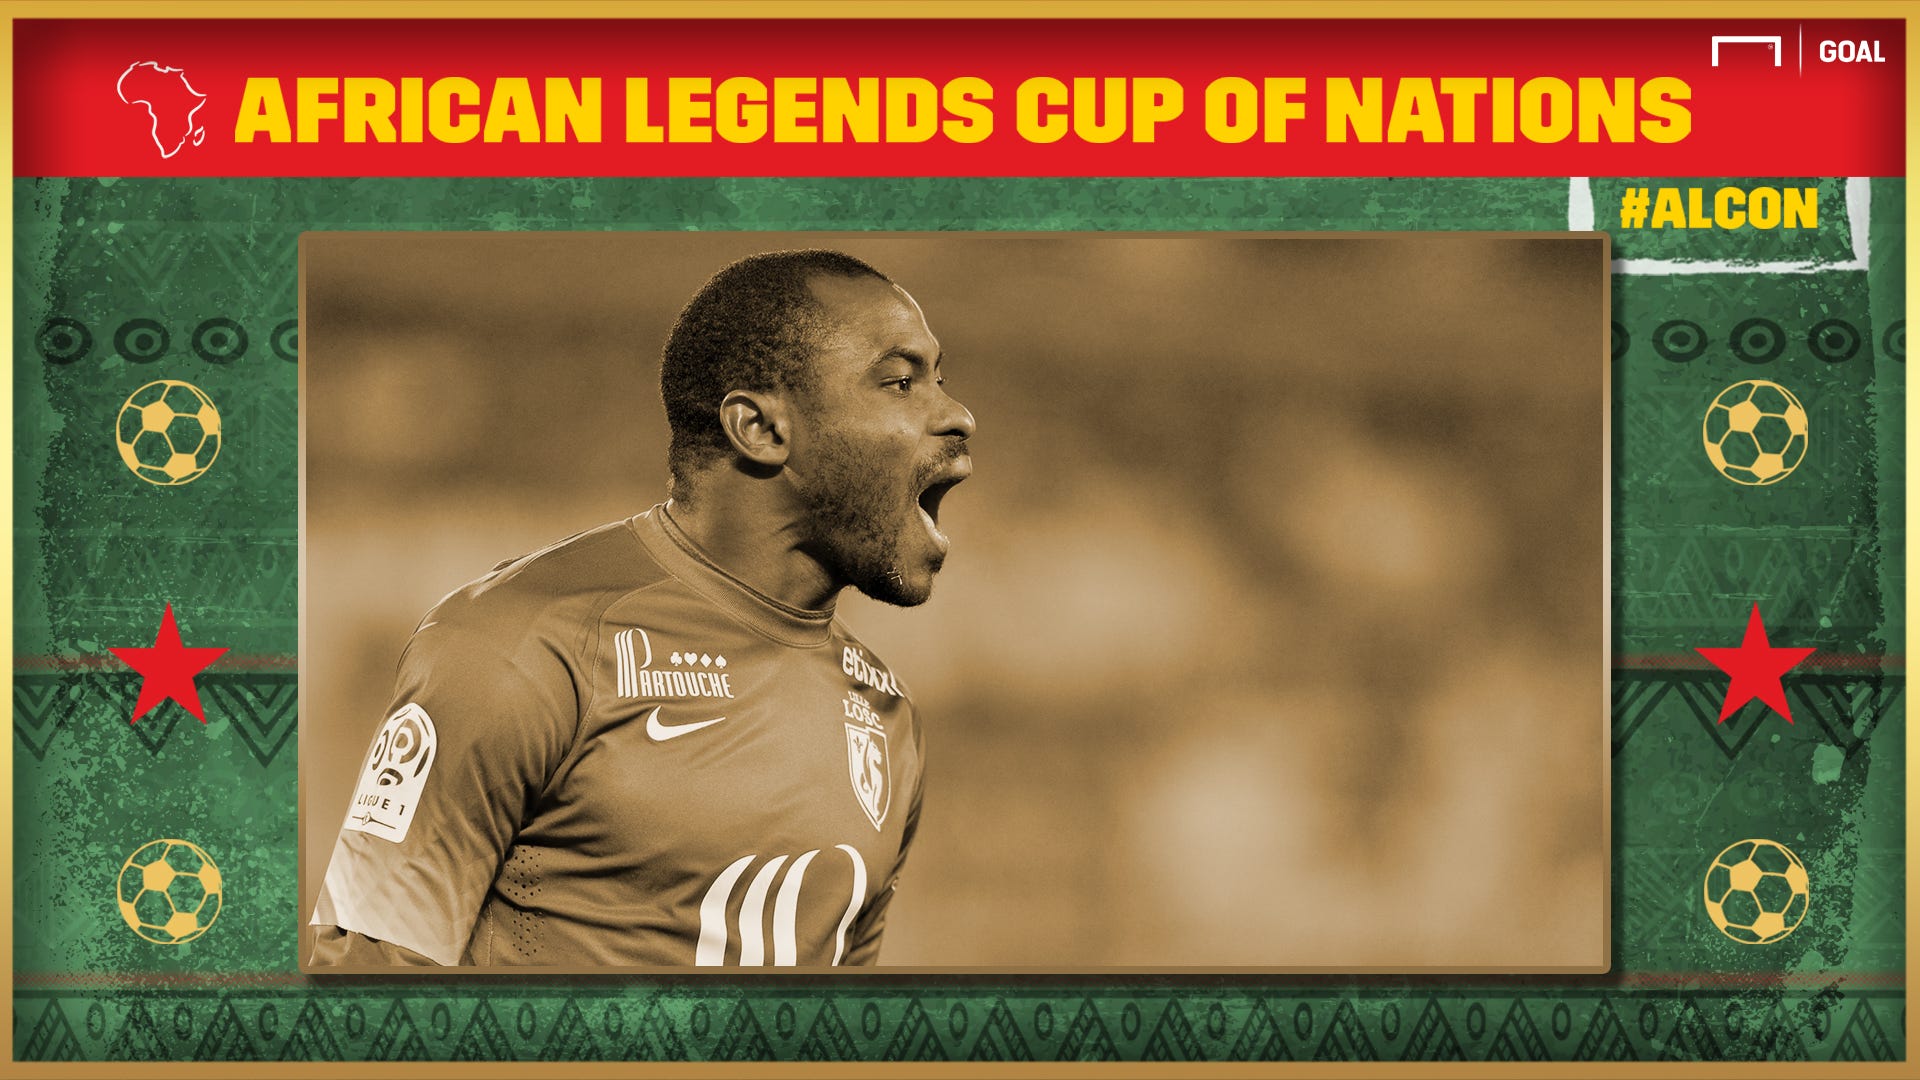 African Legends Cup of Nations Vincent Enyeama